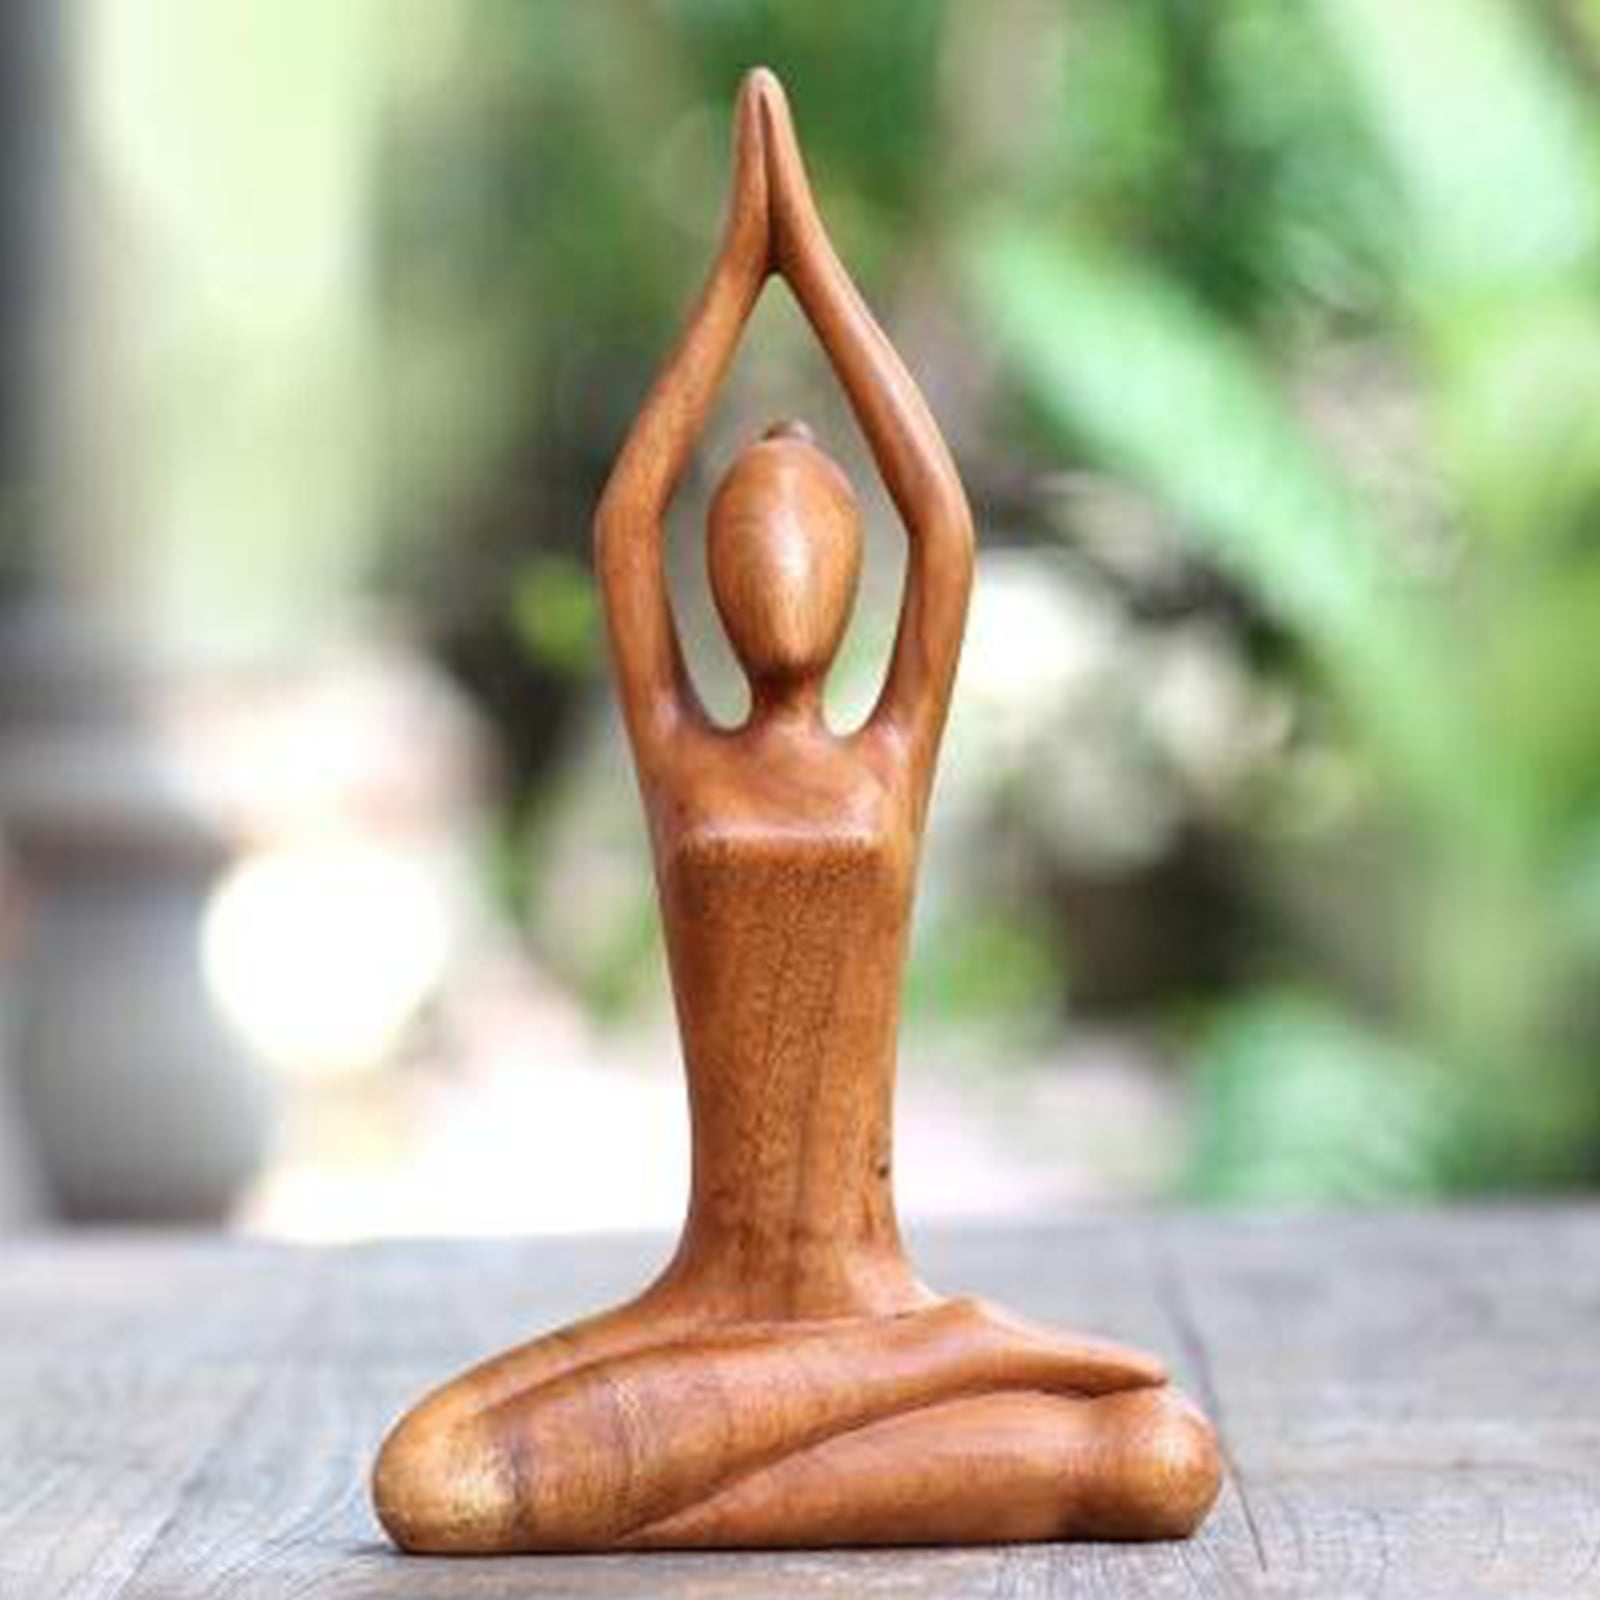 Eariy Yoga Pose Wooden Carving Sculpture Natural Brown Wood Sculpture Gifts for Gymnastic Lovers Yoga Meditation Home Decoration Hand Carved Human Figure Bedroom and Living Room